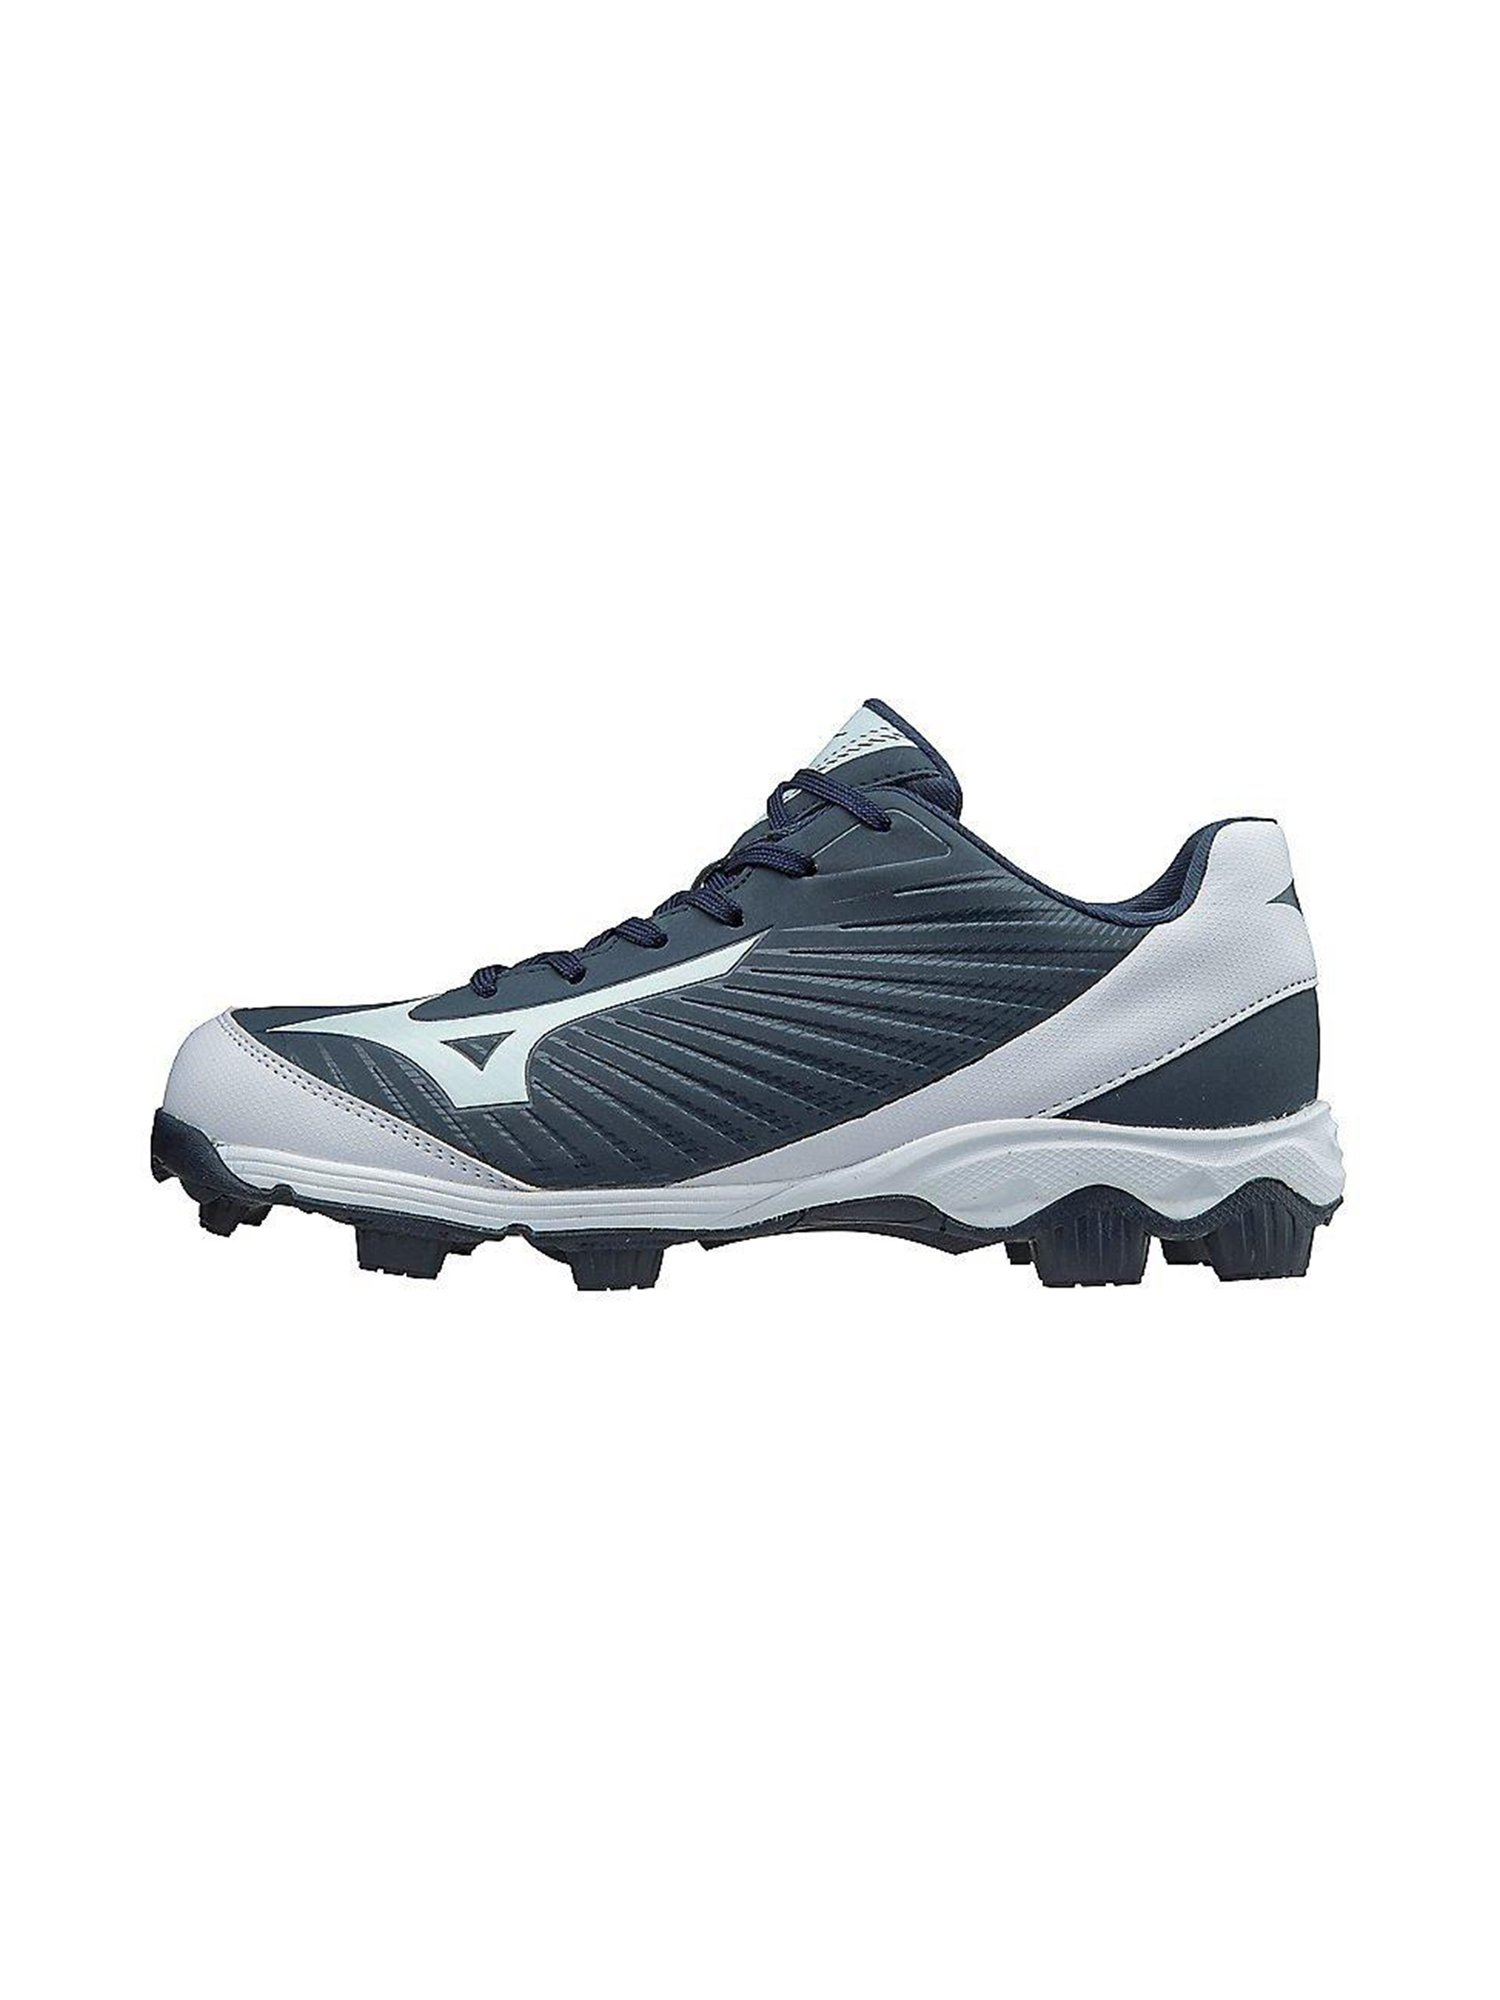 Mizuno 9-Spike Advanced Franchise 9 Low Baseball Cleats Size 11.5 Navy/White - image 2 of 6